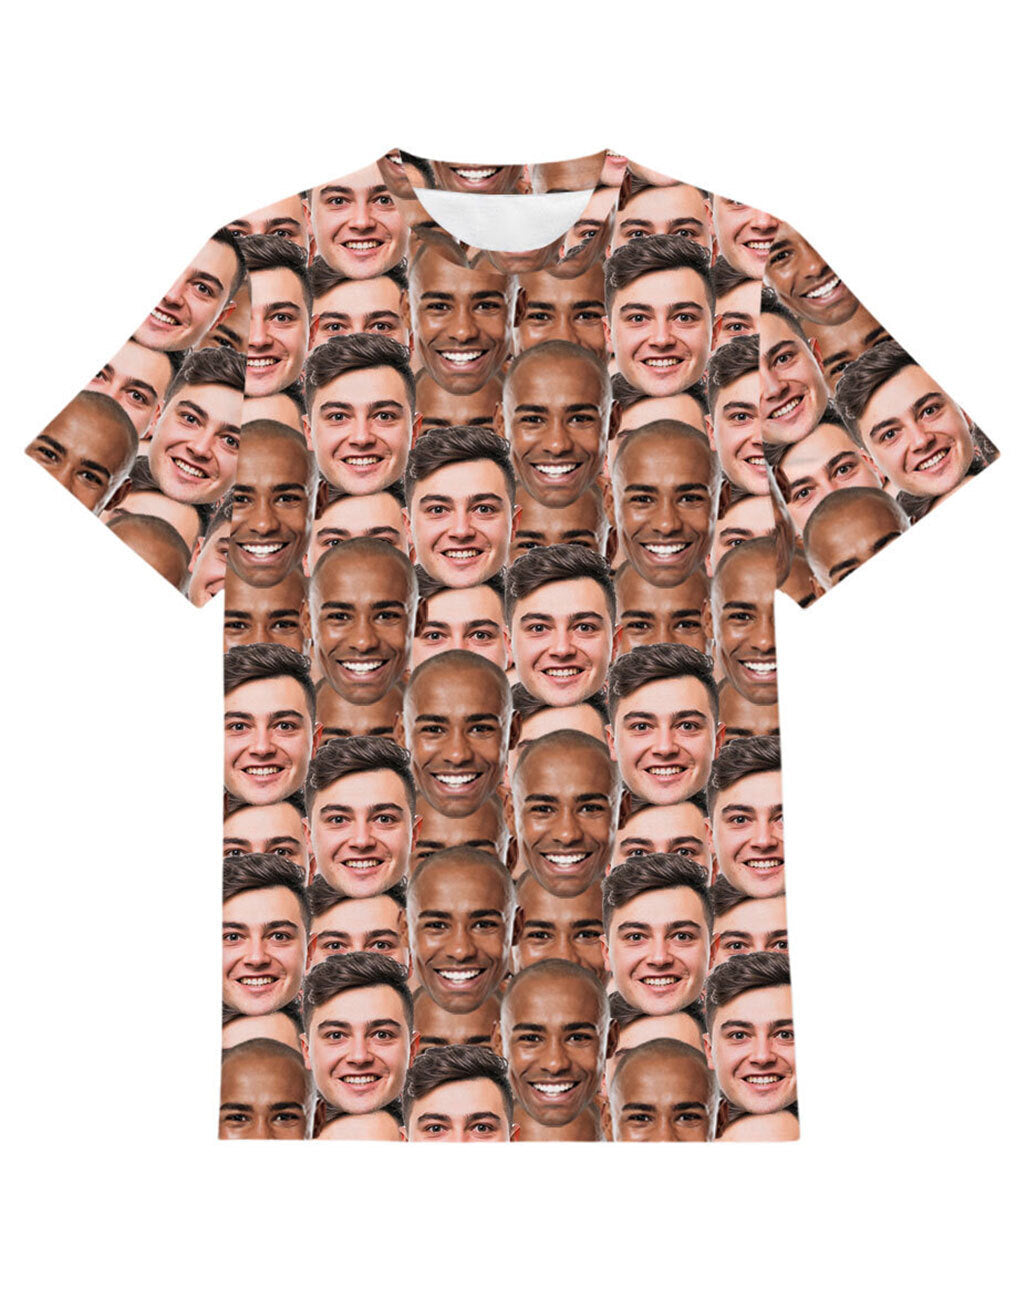 best friend Personalized t shirt featuring your faces